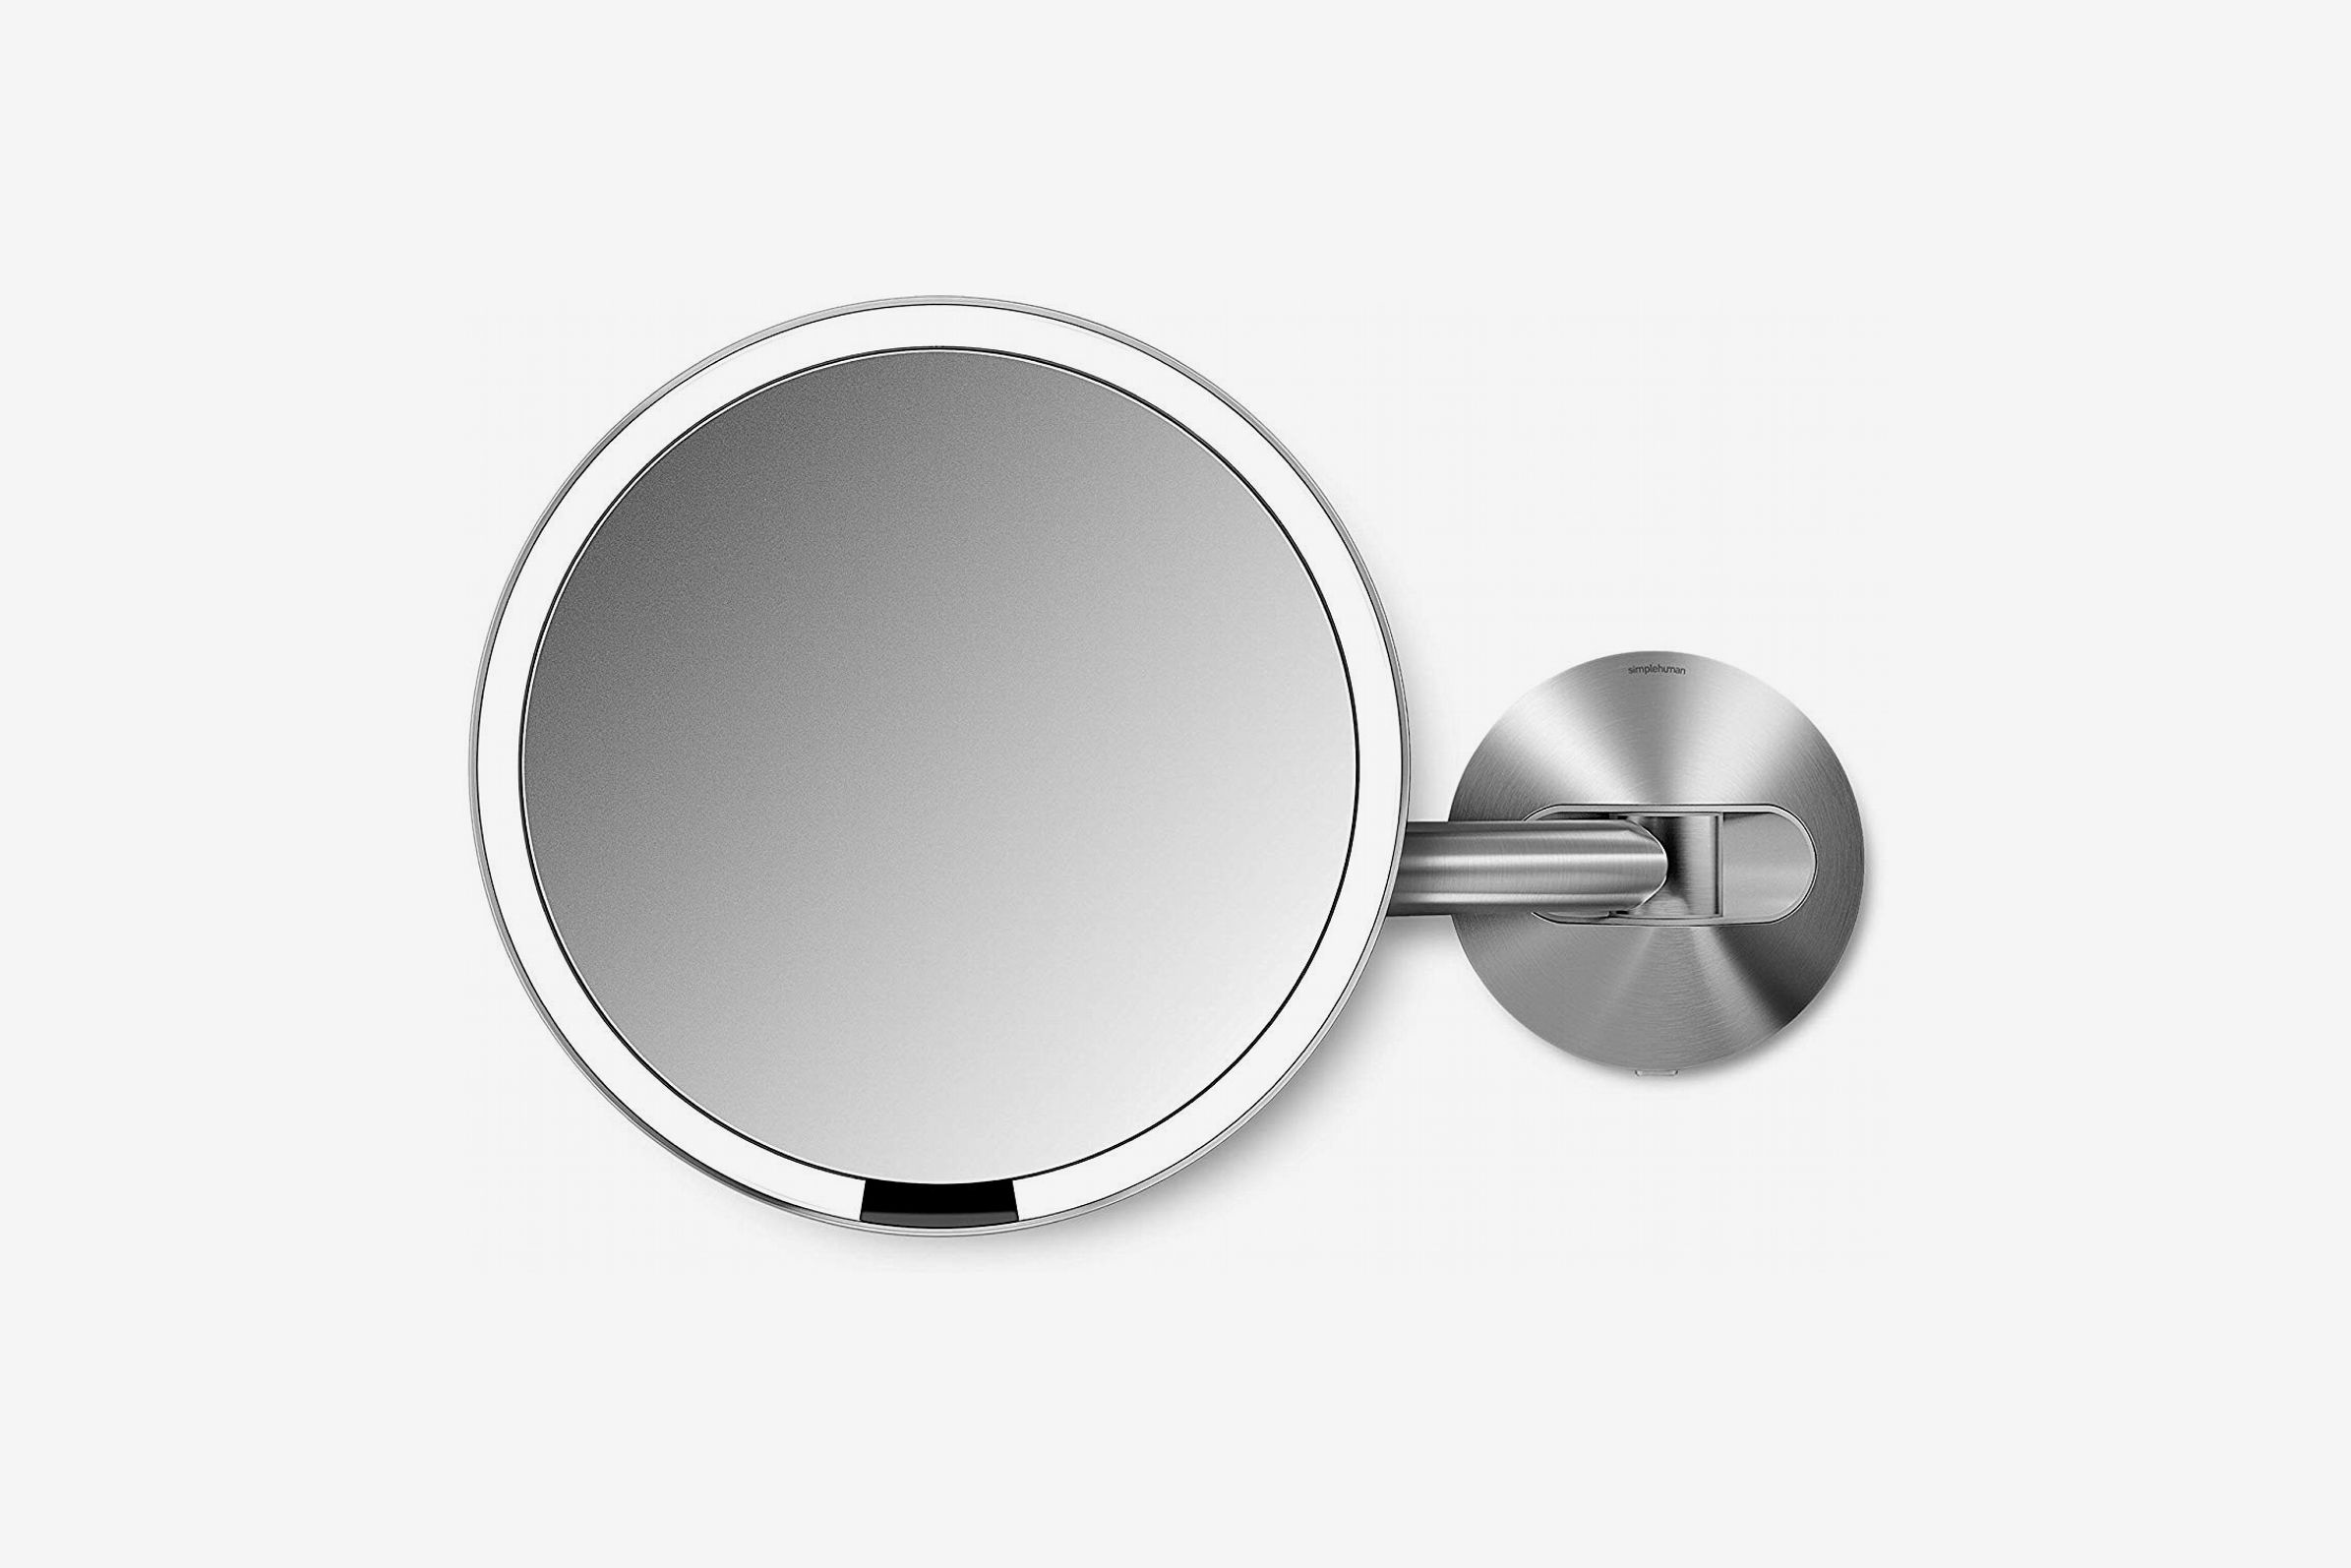 14 Best Lighted Makeup Mirrors 2021, Best Lighted Makeup Mirror Canada